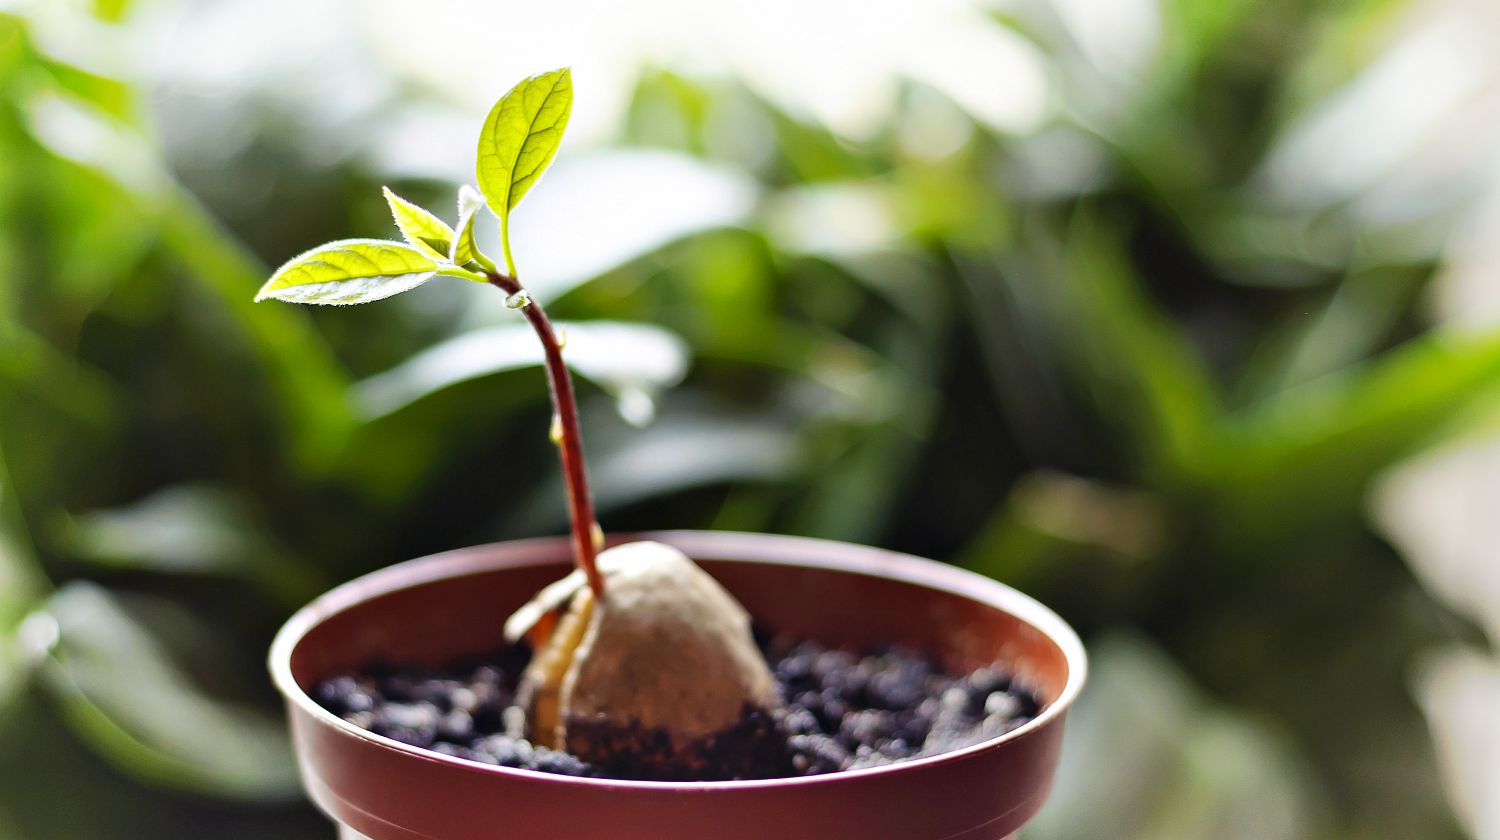 How to Grow an Avocado From a Seed Gardening Ideas